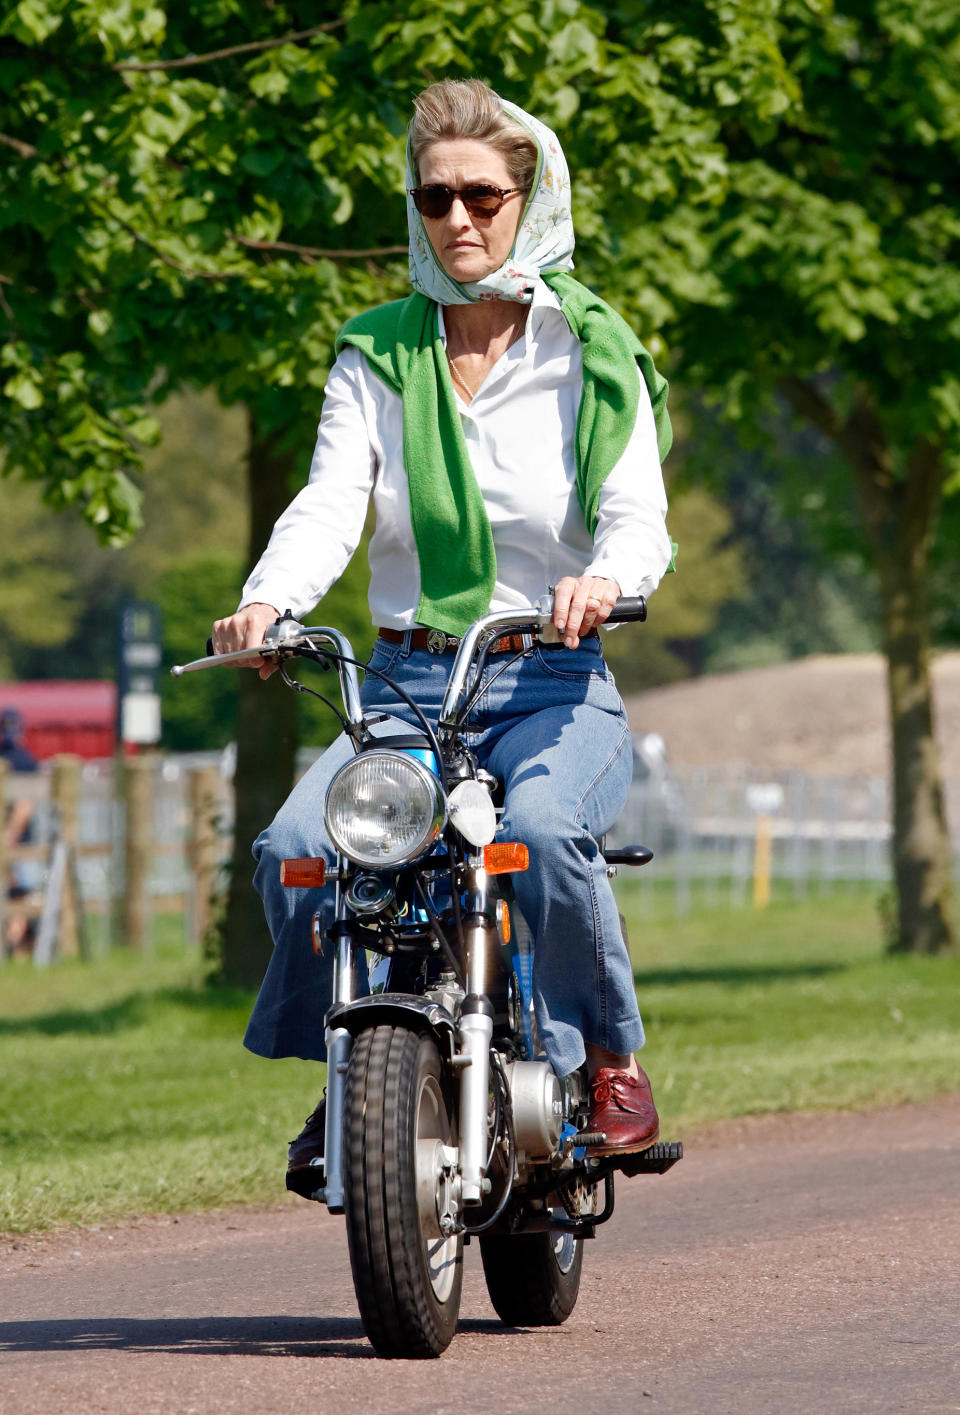 WINDSOR, UNITED KINGDOM - MAY 11: (EMBARGOED FOR PUBLICATION IN UK NEWSPAPERS UNTIL 24 HOURS AFTER CREATE DATE AND TIME) Penelope Knatchbull, Lady Brabourne seen riding a mini 'Easy-Rider' motorbike as she attends day 1 of the Royal Windsor Horse Show in Home Park on May 11, 2006 in Windsor, England. (Photo by Max Mumby/Indigo/Getty Images)